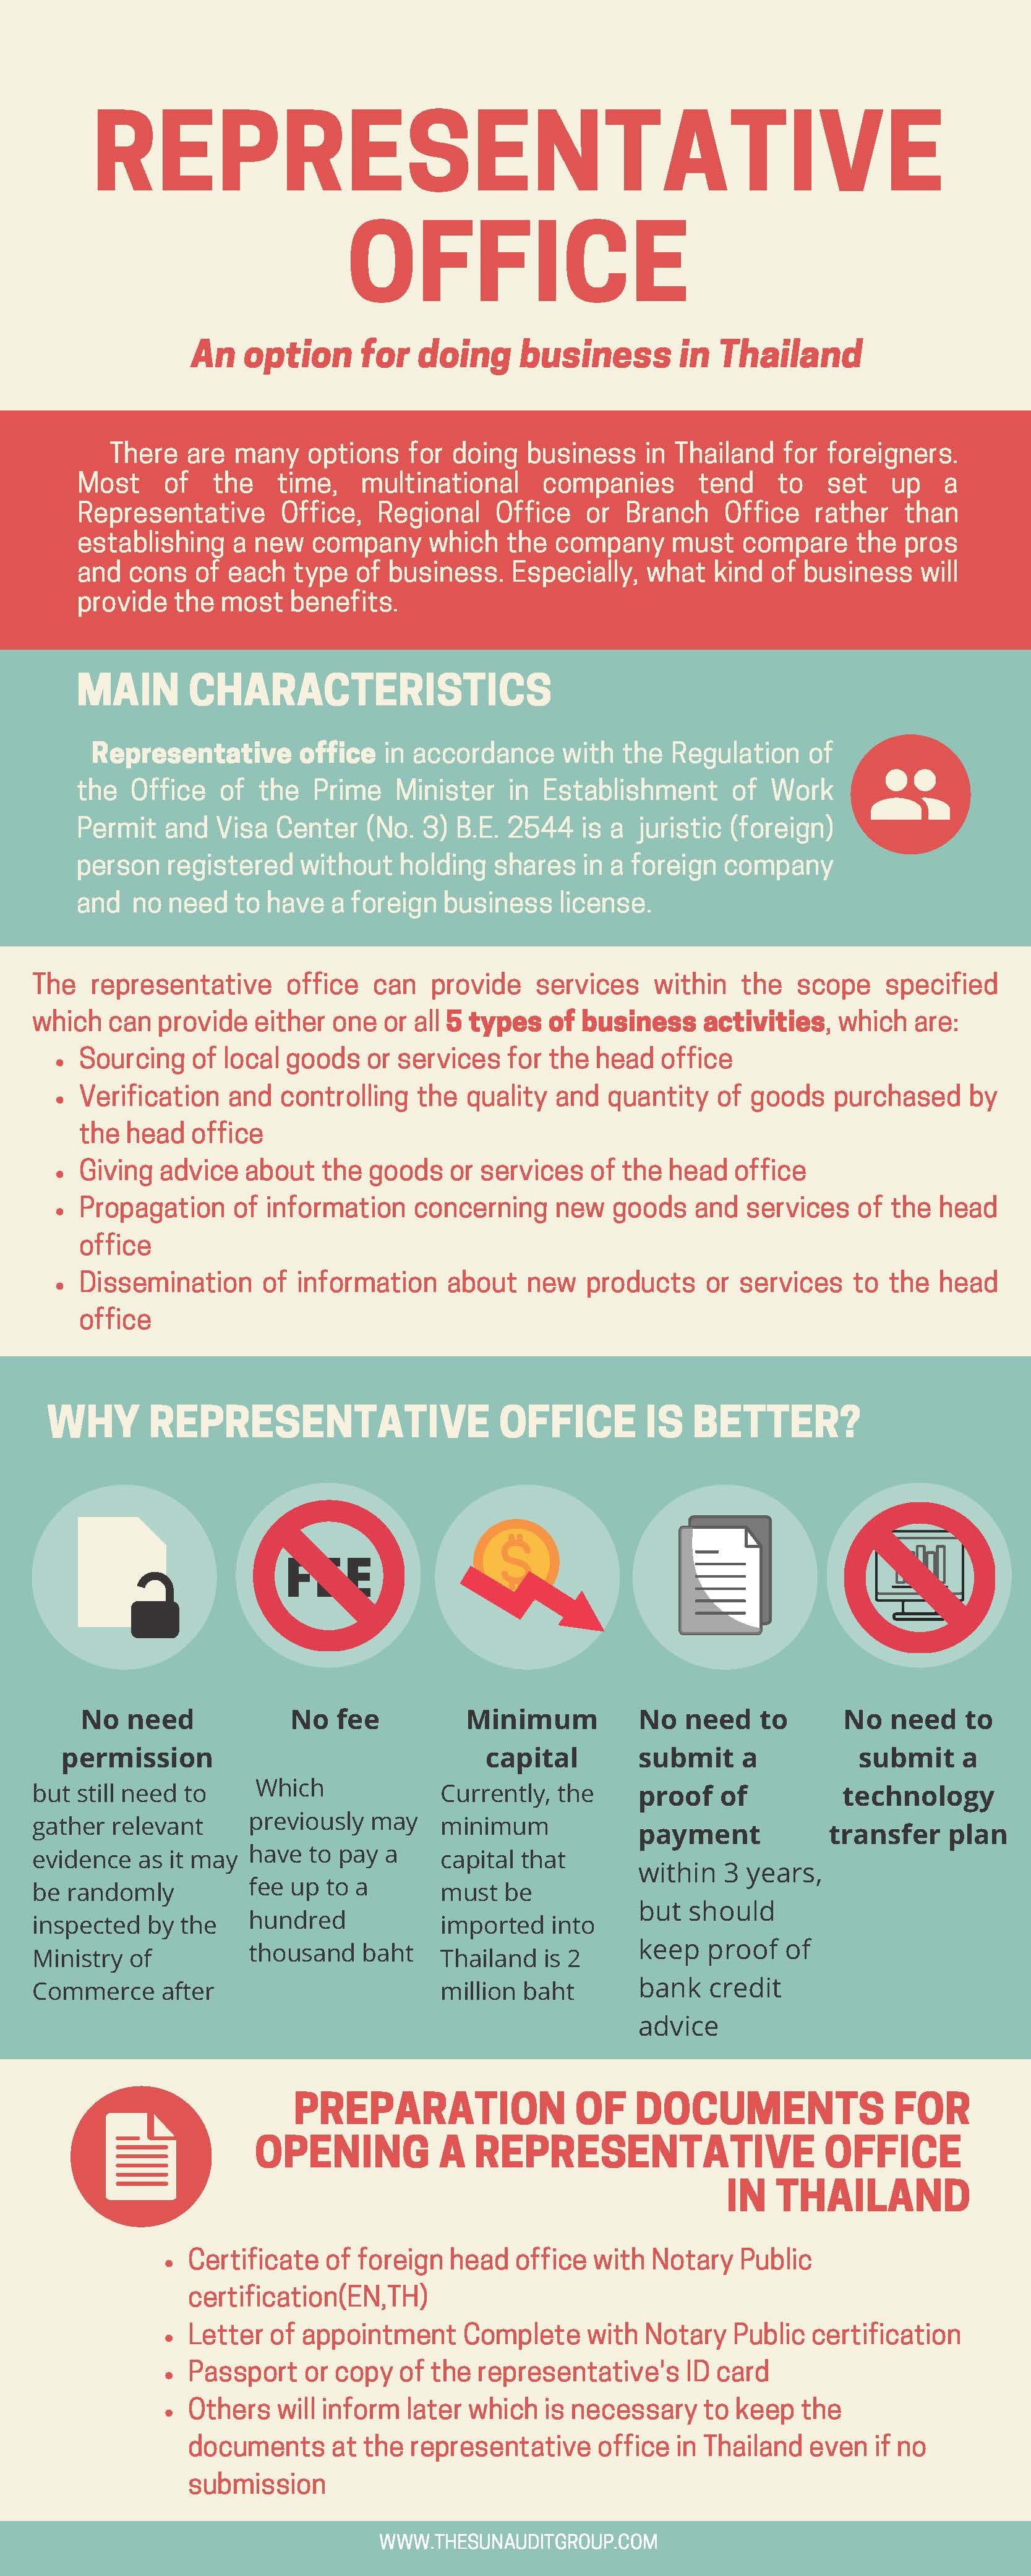 How to start a representative office in Thailand